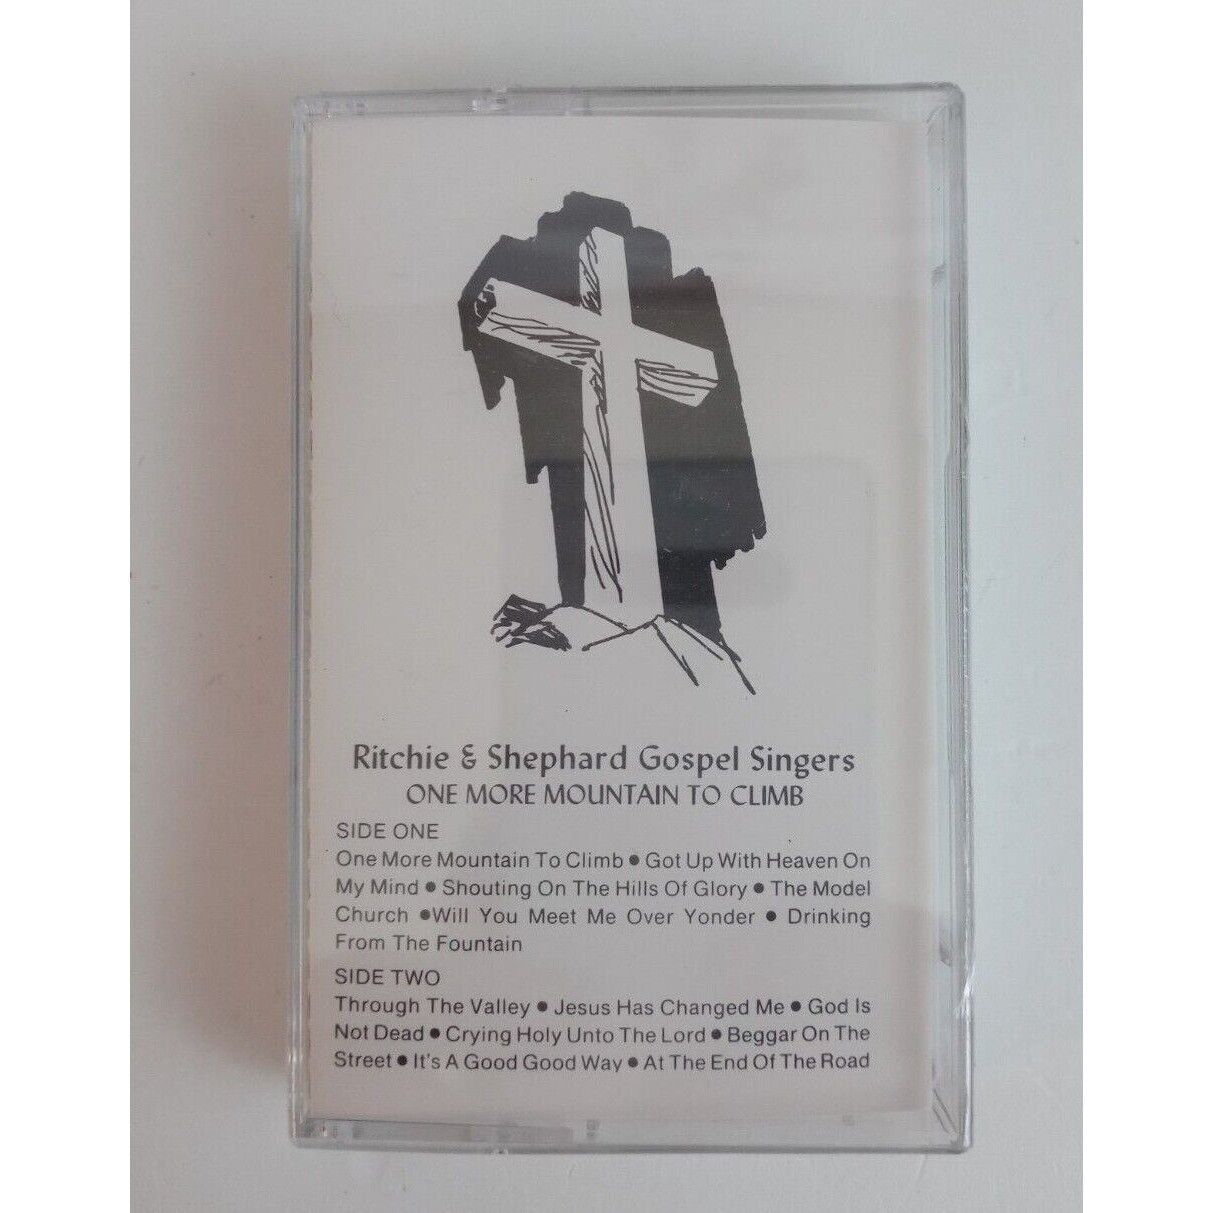 Primary image for Ritchie & Shephard Gospel Singers One More Mountain to climb Cassette New Sealed